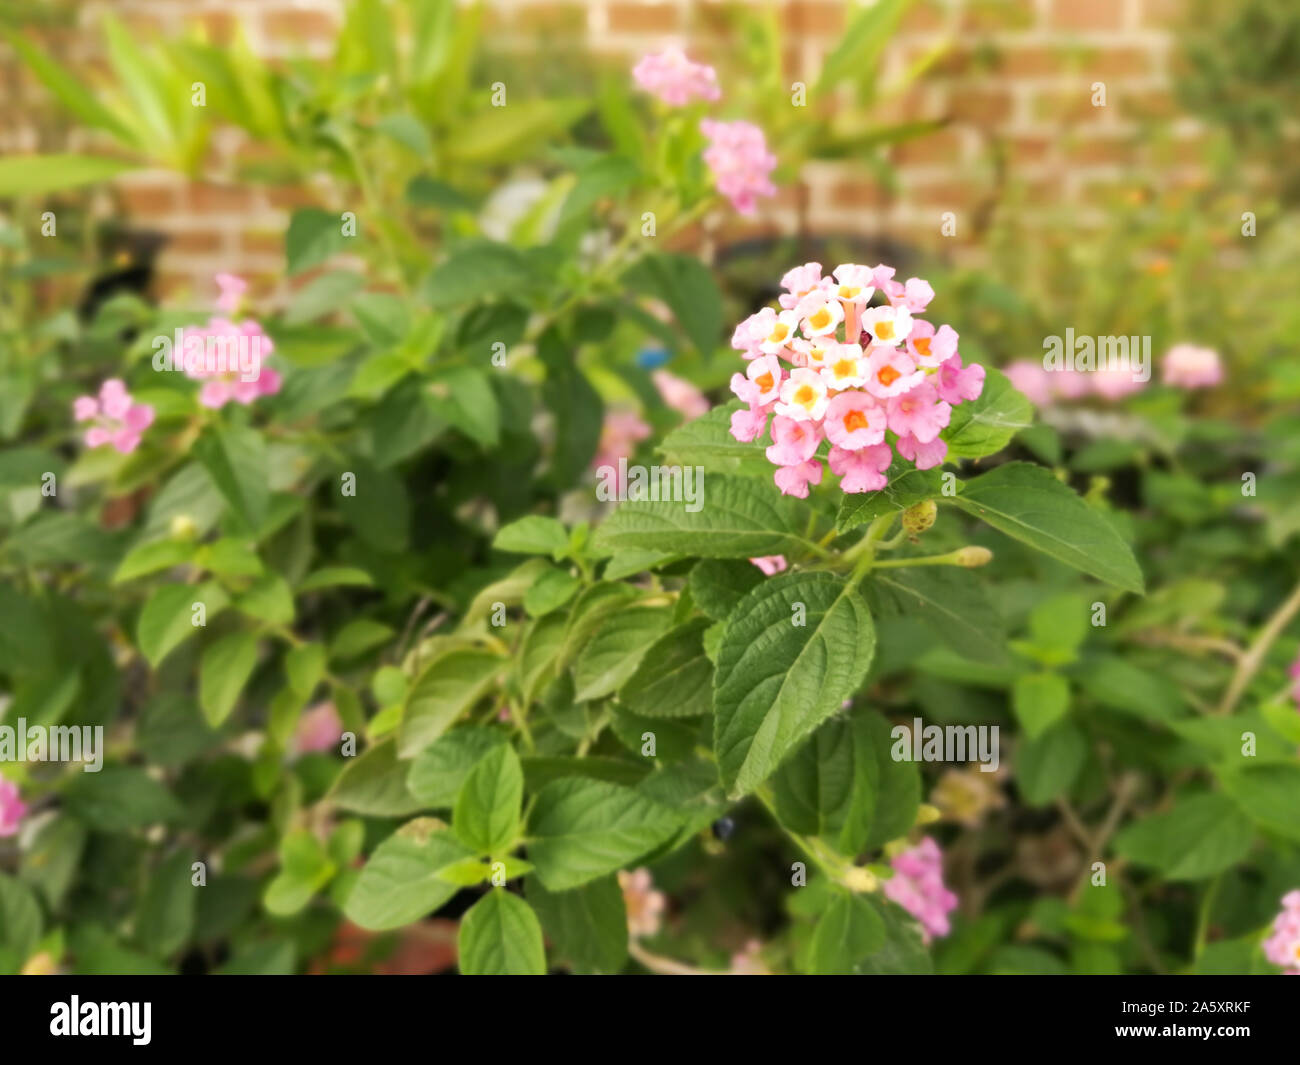 Beautiful of Pink flowers in the garden at evening (Lantana camara L.) on brick background with vision blur Stock Photo